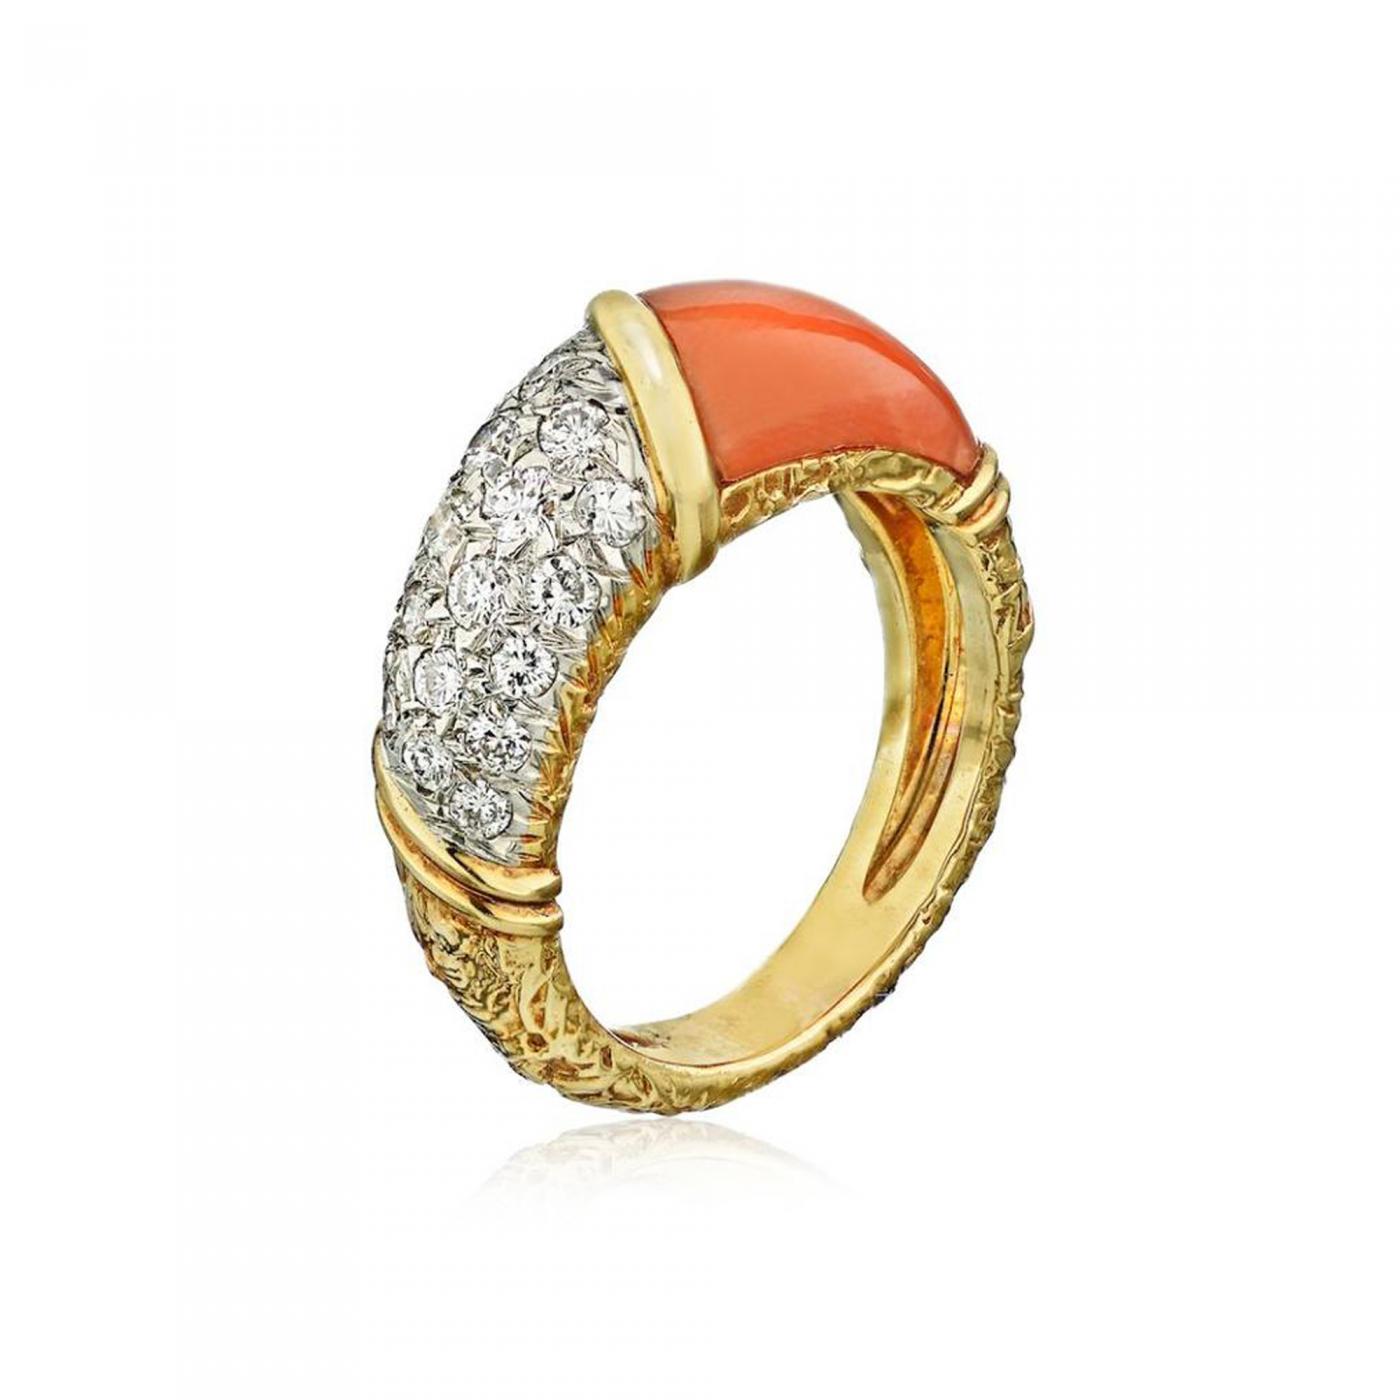 VAN CLEEF & ARPELS Cocktail ring in yellow gold, coral and pearls